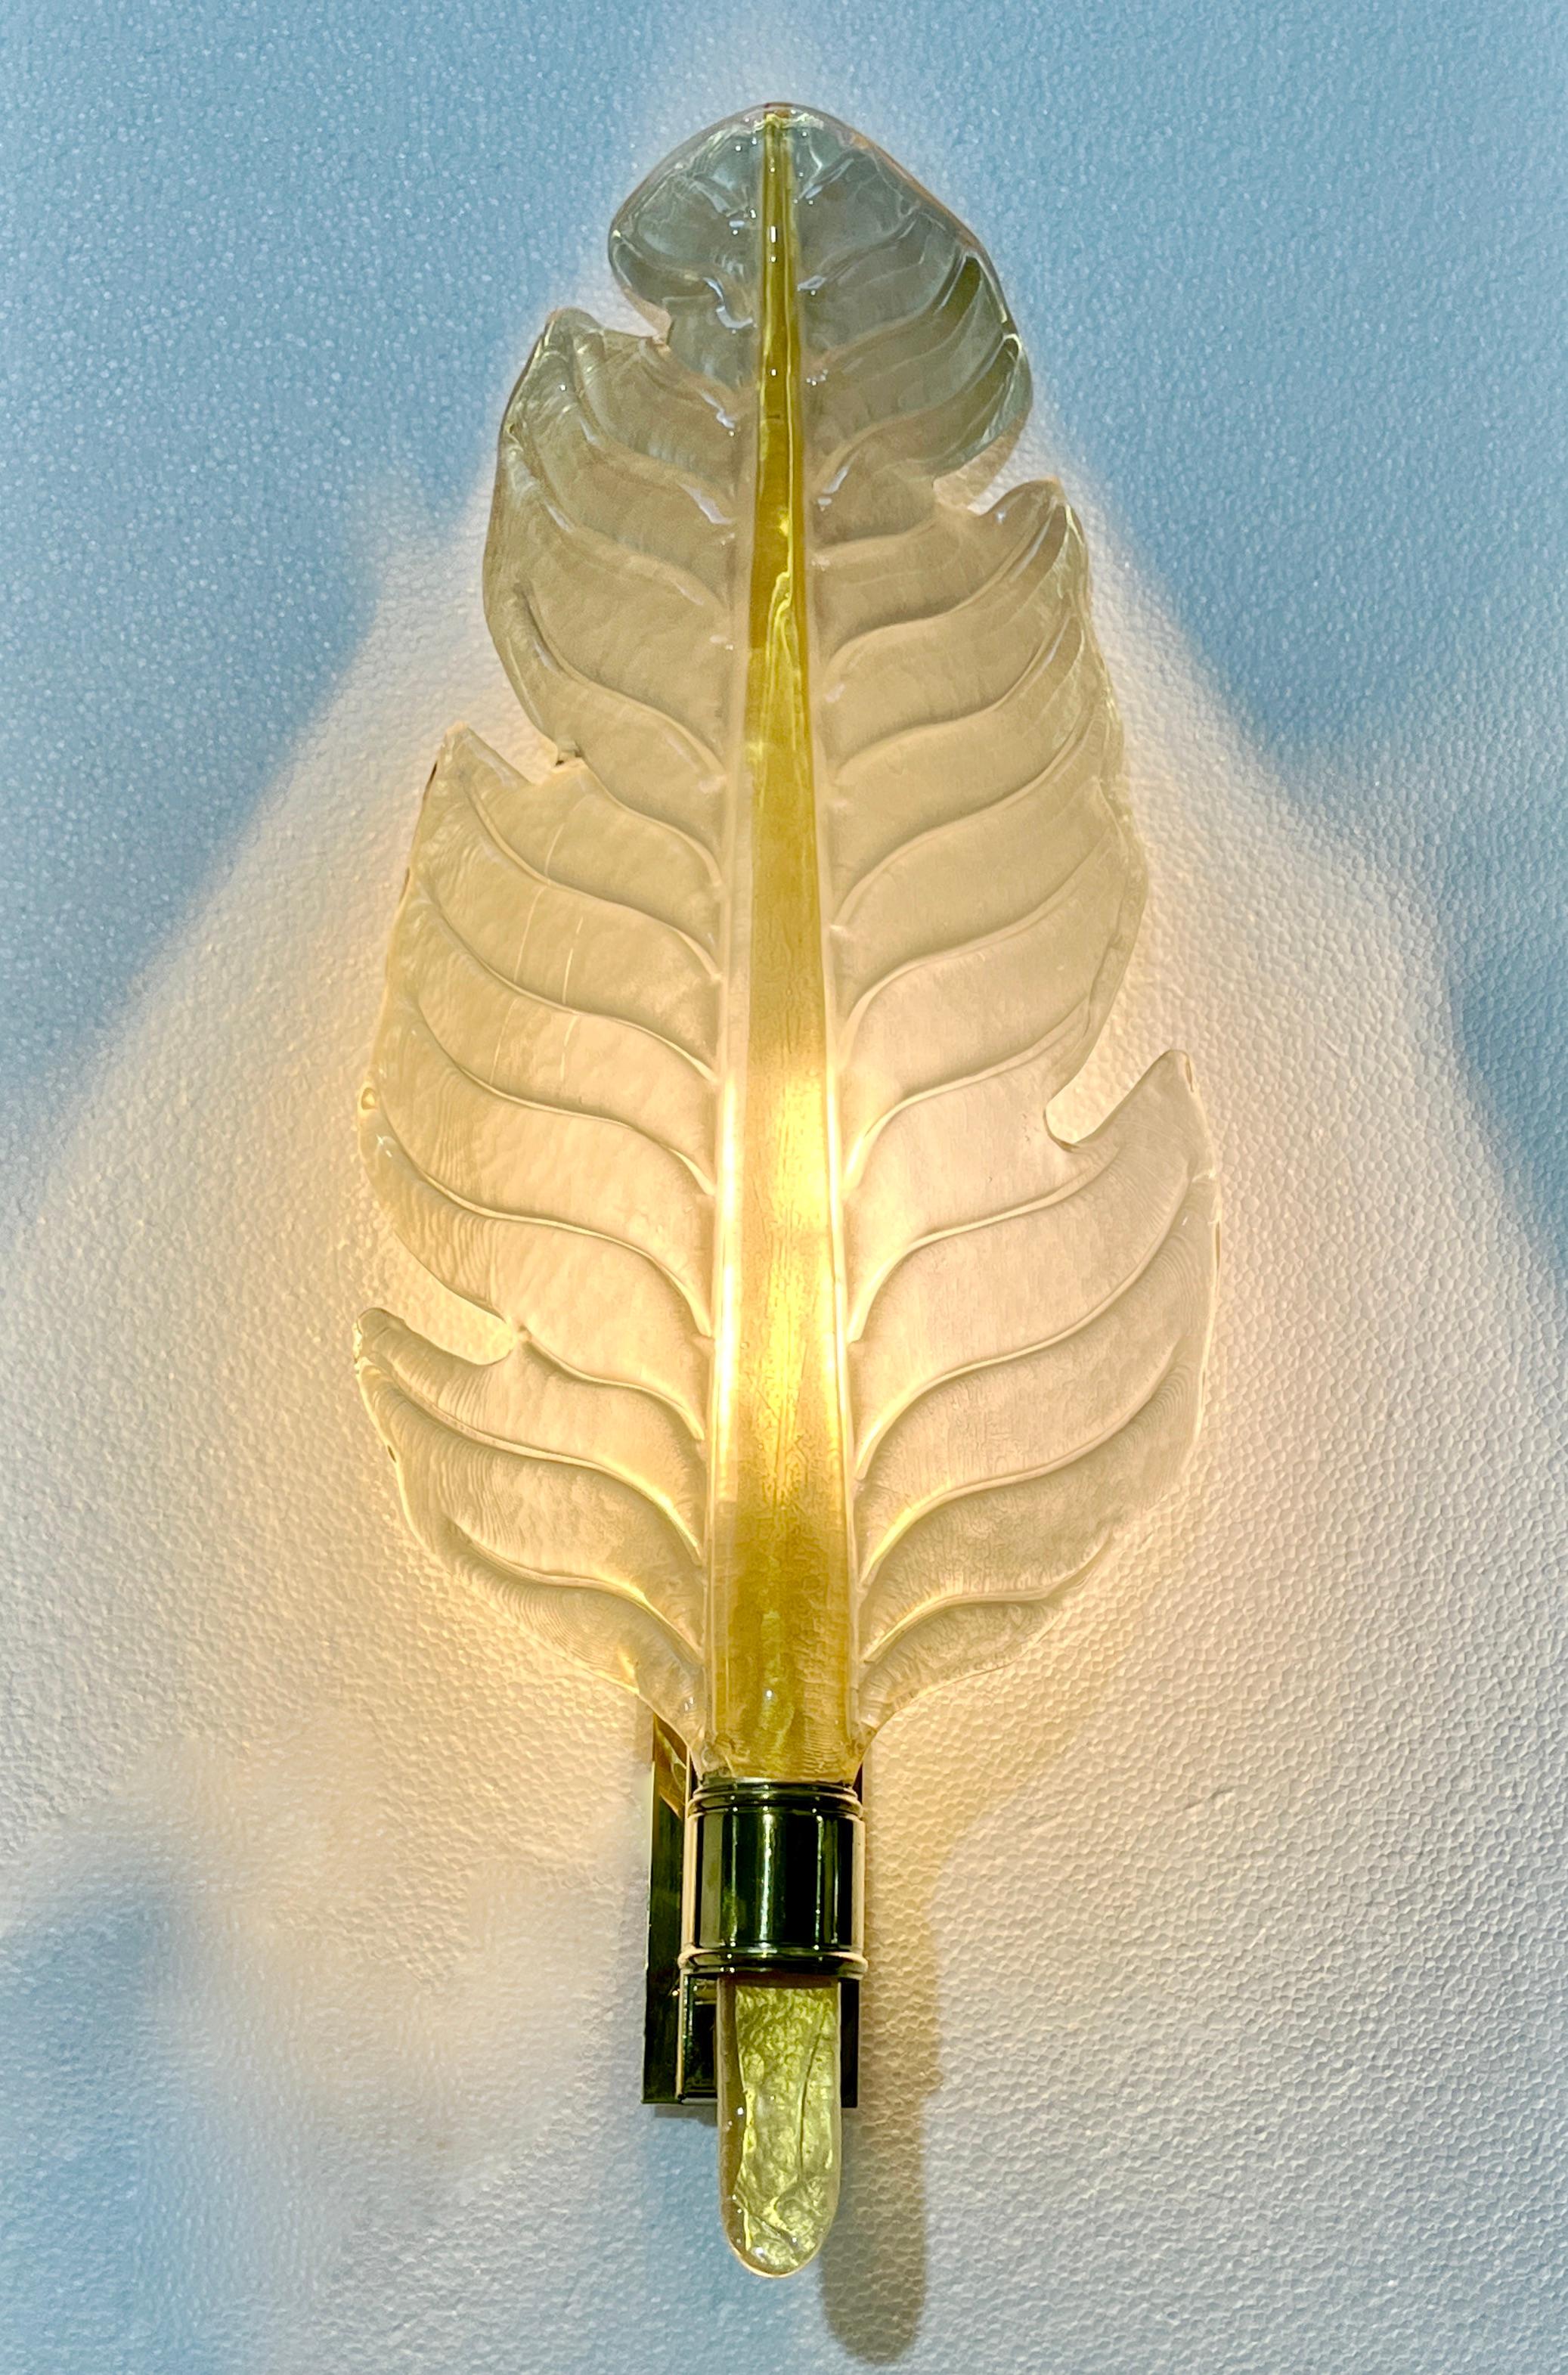 Very elegant pair of bespoke wall lights in blown Murano glass in the style of Barovier, with an Art Deco design feather leaf organic modern shape. Entirely handcrafted in Italy, the high-quality Murano glass has a pearl luminosity iridescence amber